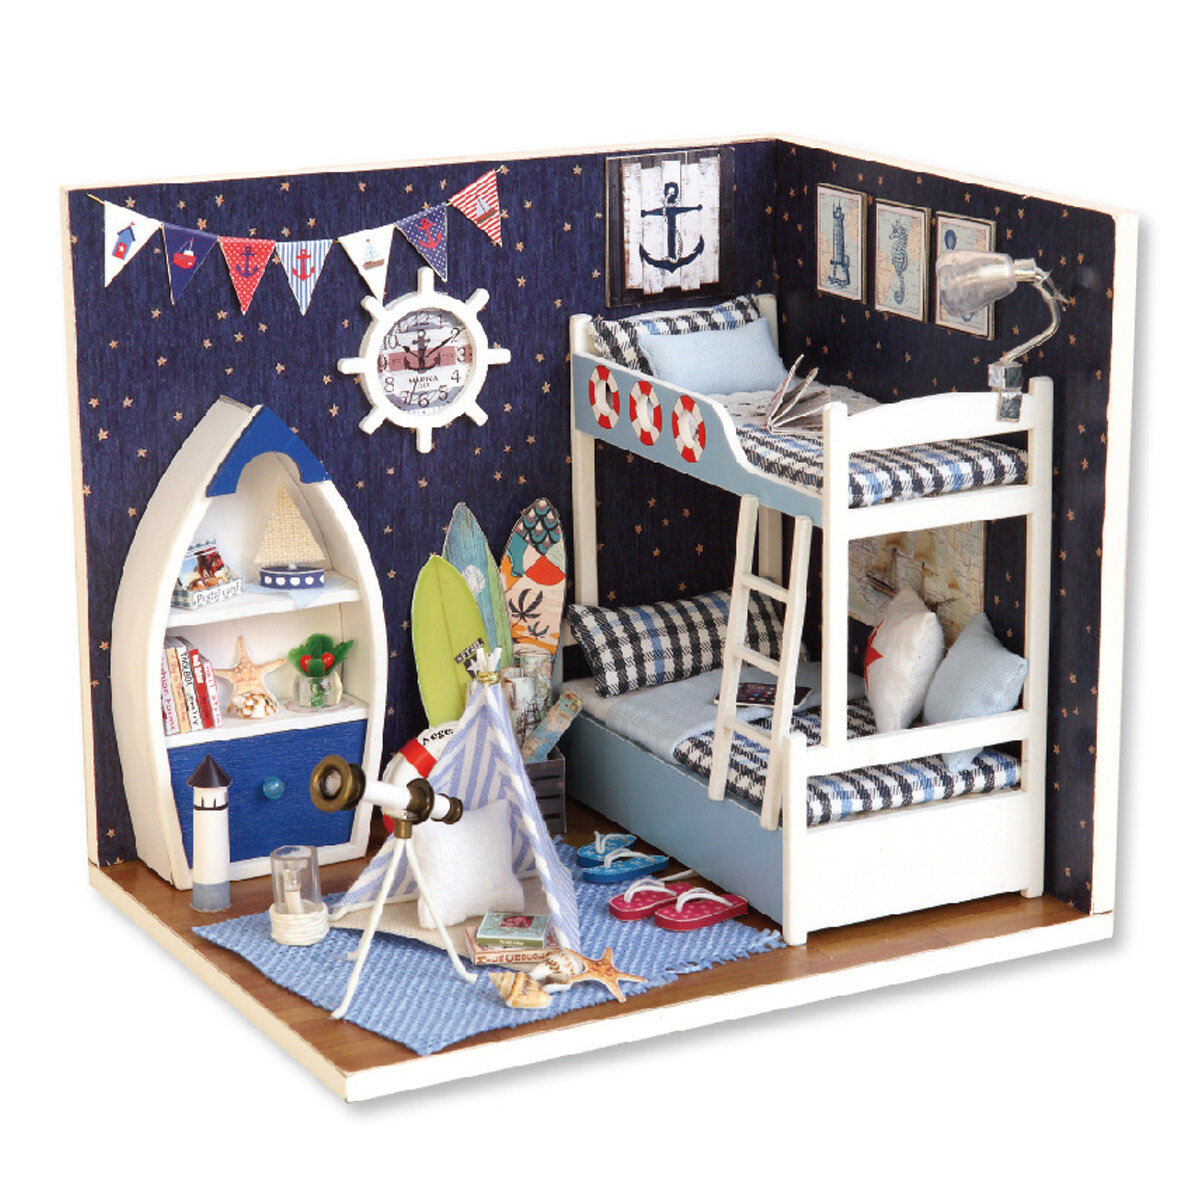 Cute Room Wooden DIY Handmade Assemble Miniature Doll House Kit Toy with LED Light Dust Cover for Gift Collection